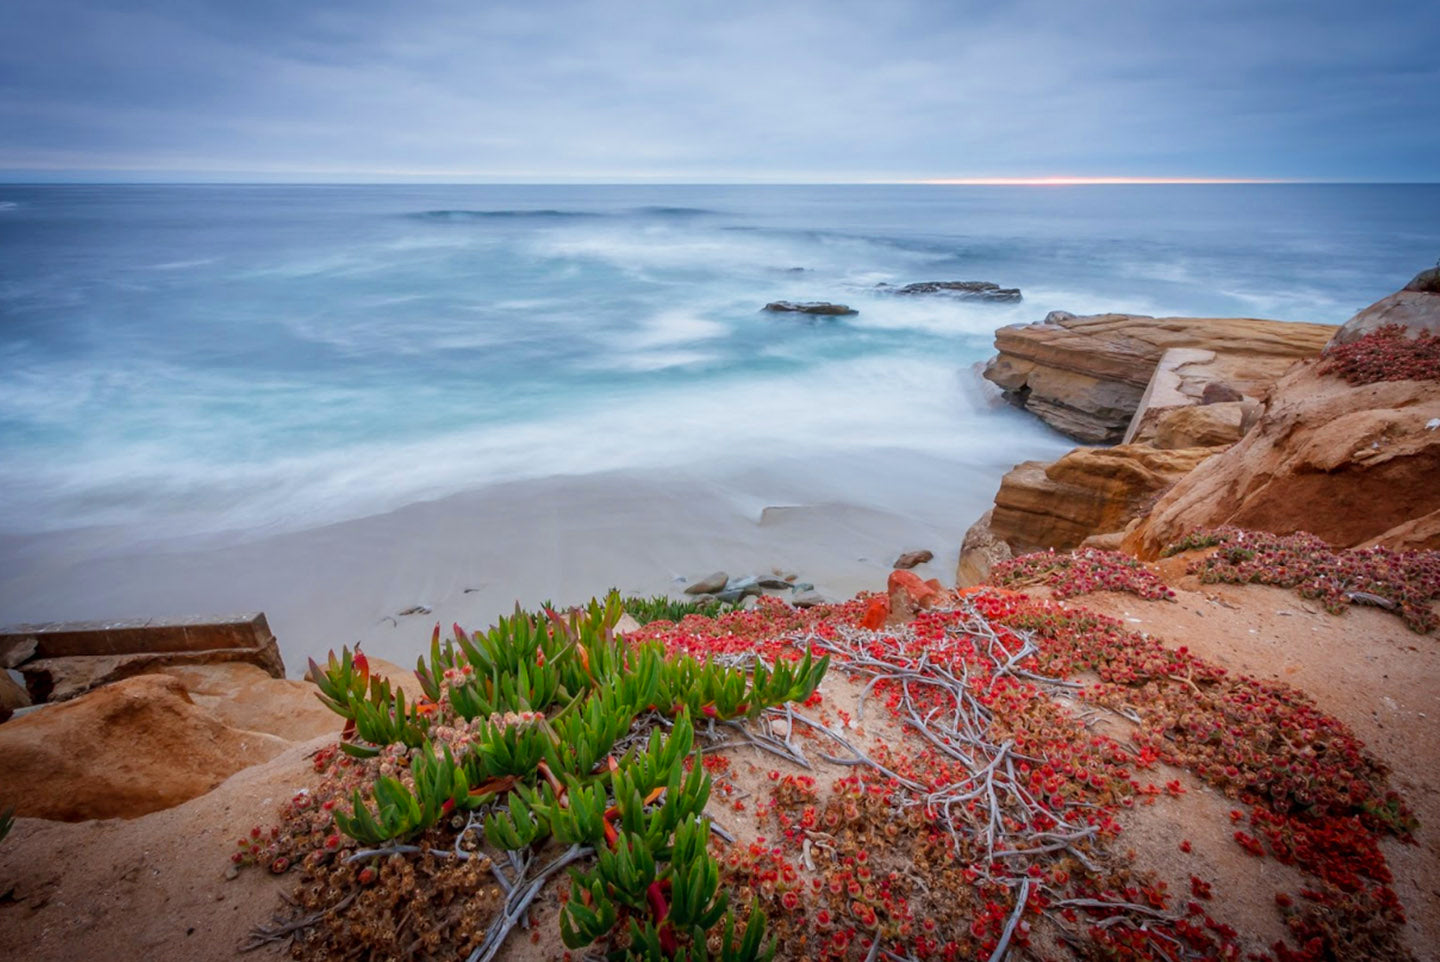 A photo of La Jolla Shores beach from the side of a cliff. The sky is overcast and gray.